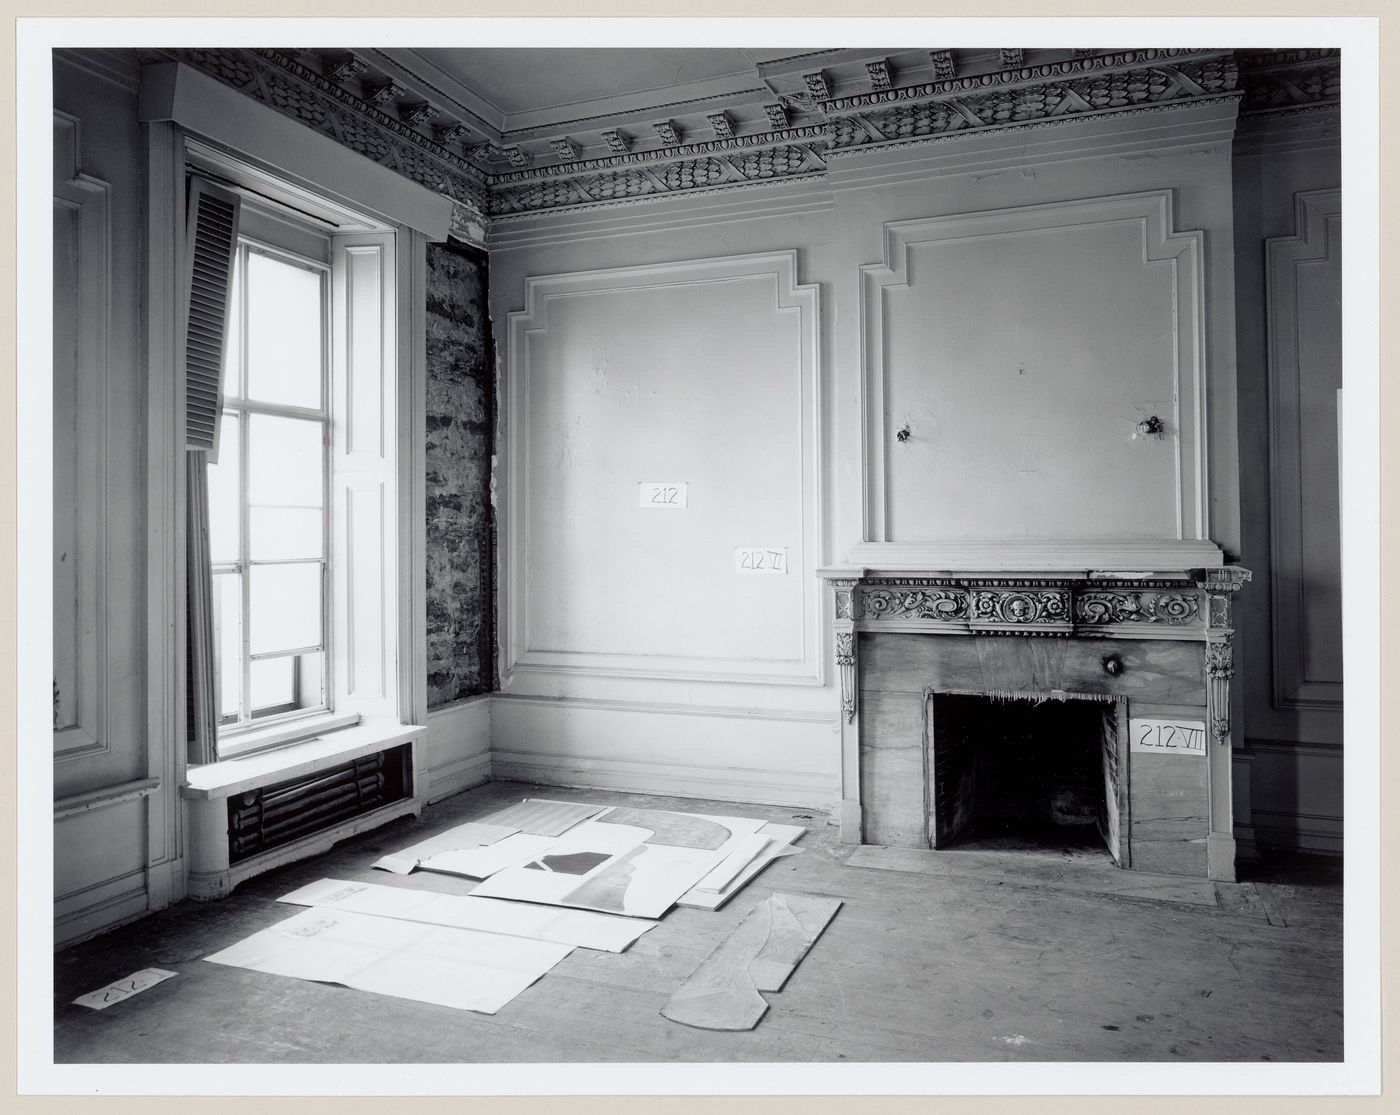 Interior view of a reception room showing a window and a fireplace, Shaughnessy House under renovation, Montréal, Québec